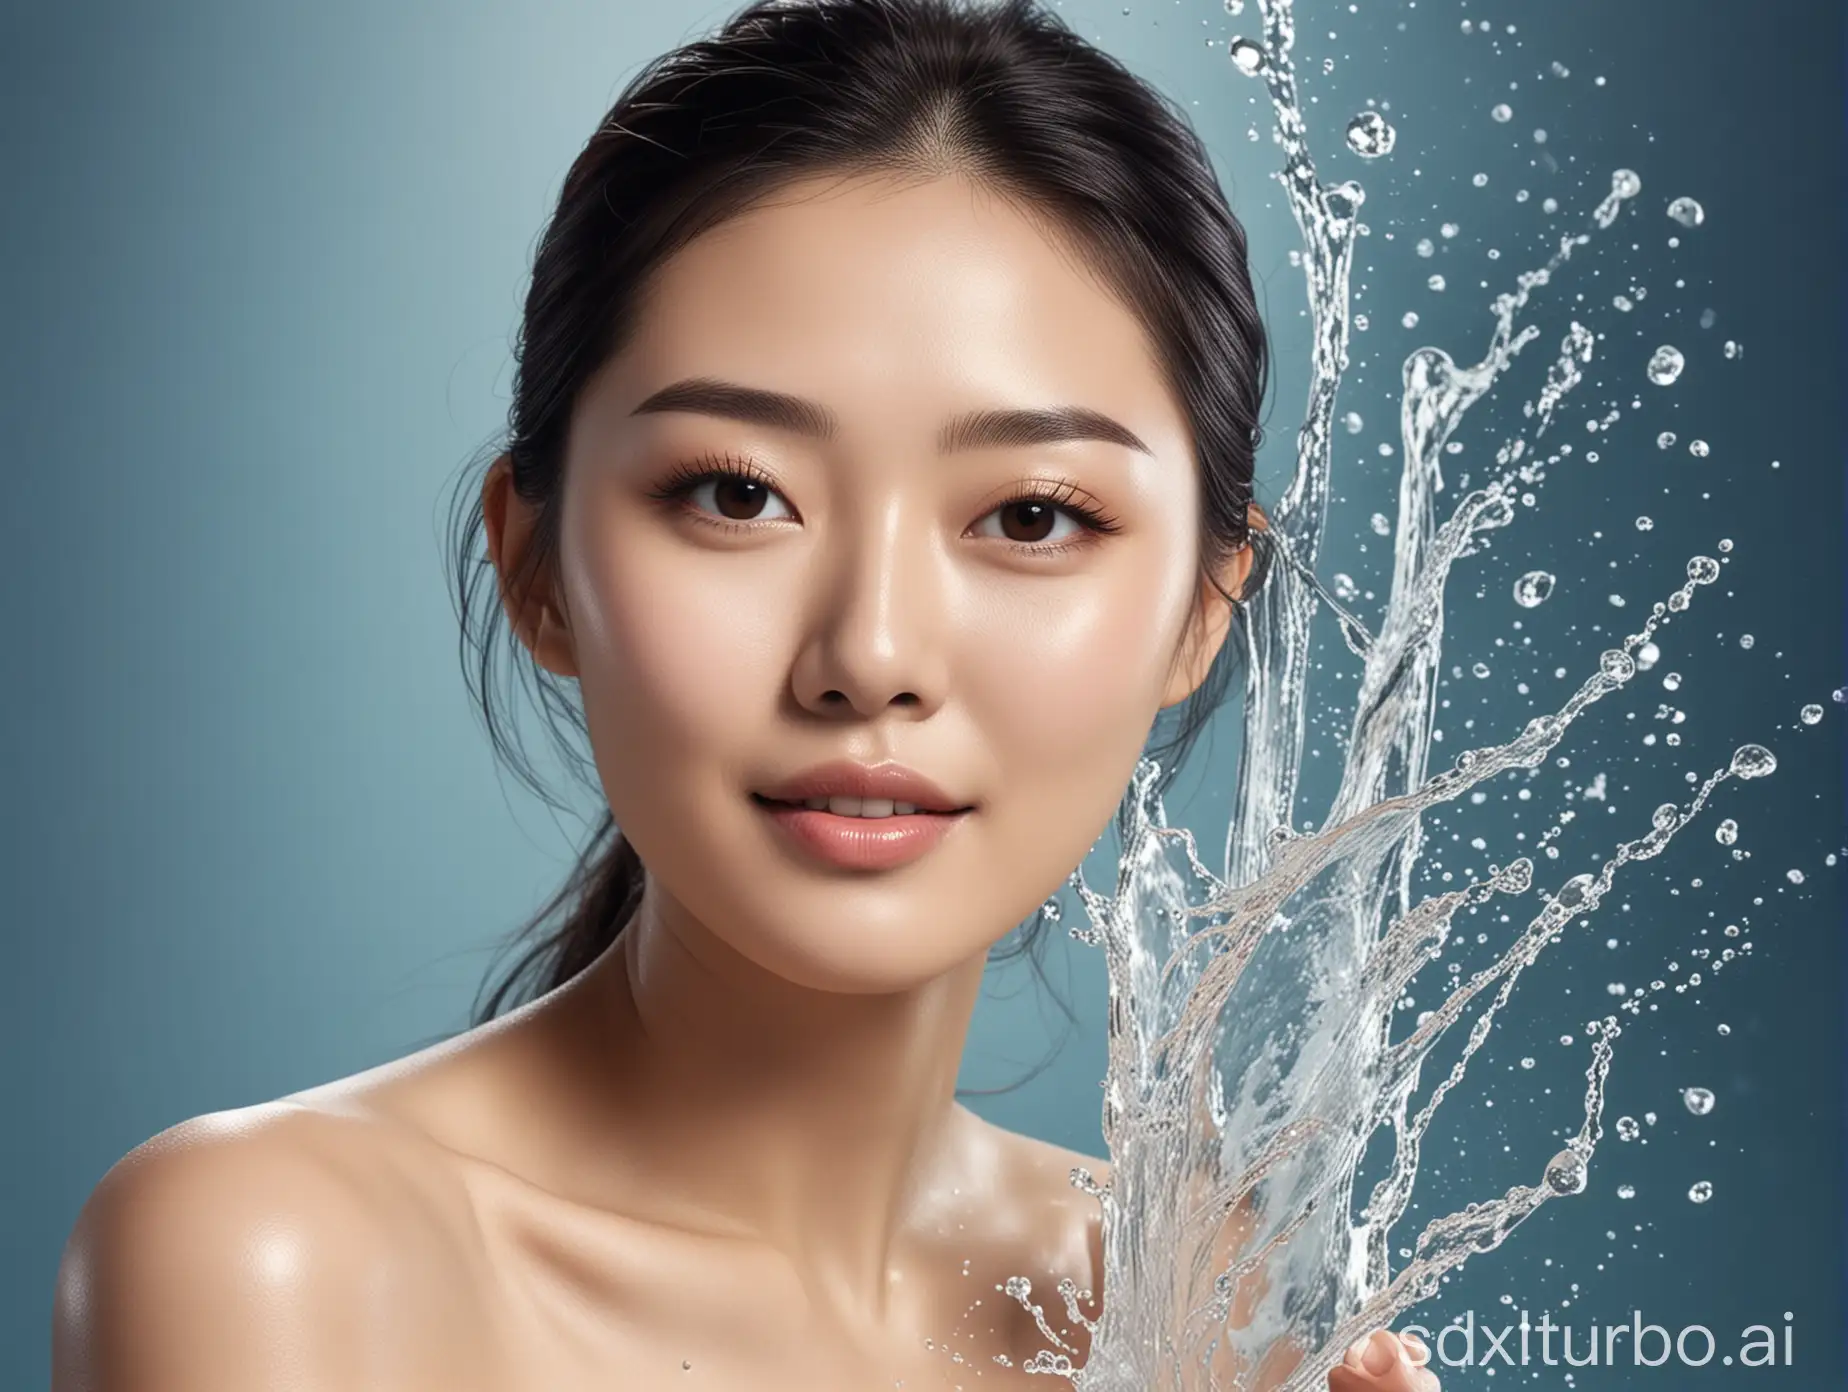 Asian-Woman-in-Water-Skincare-Product-Advertisement